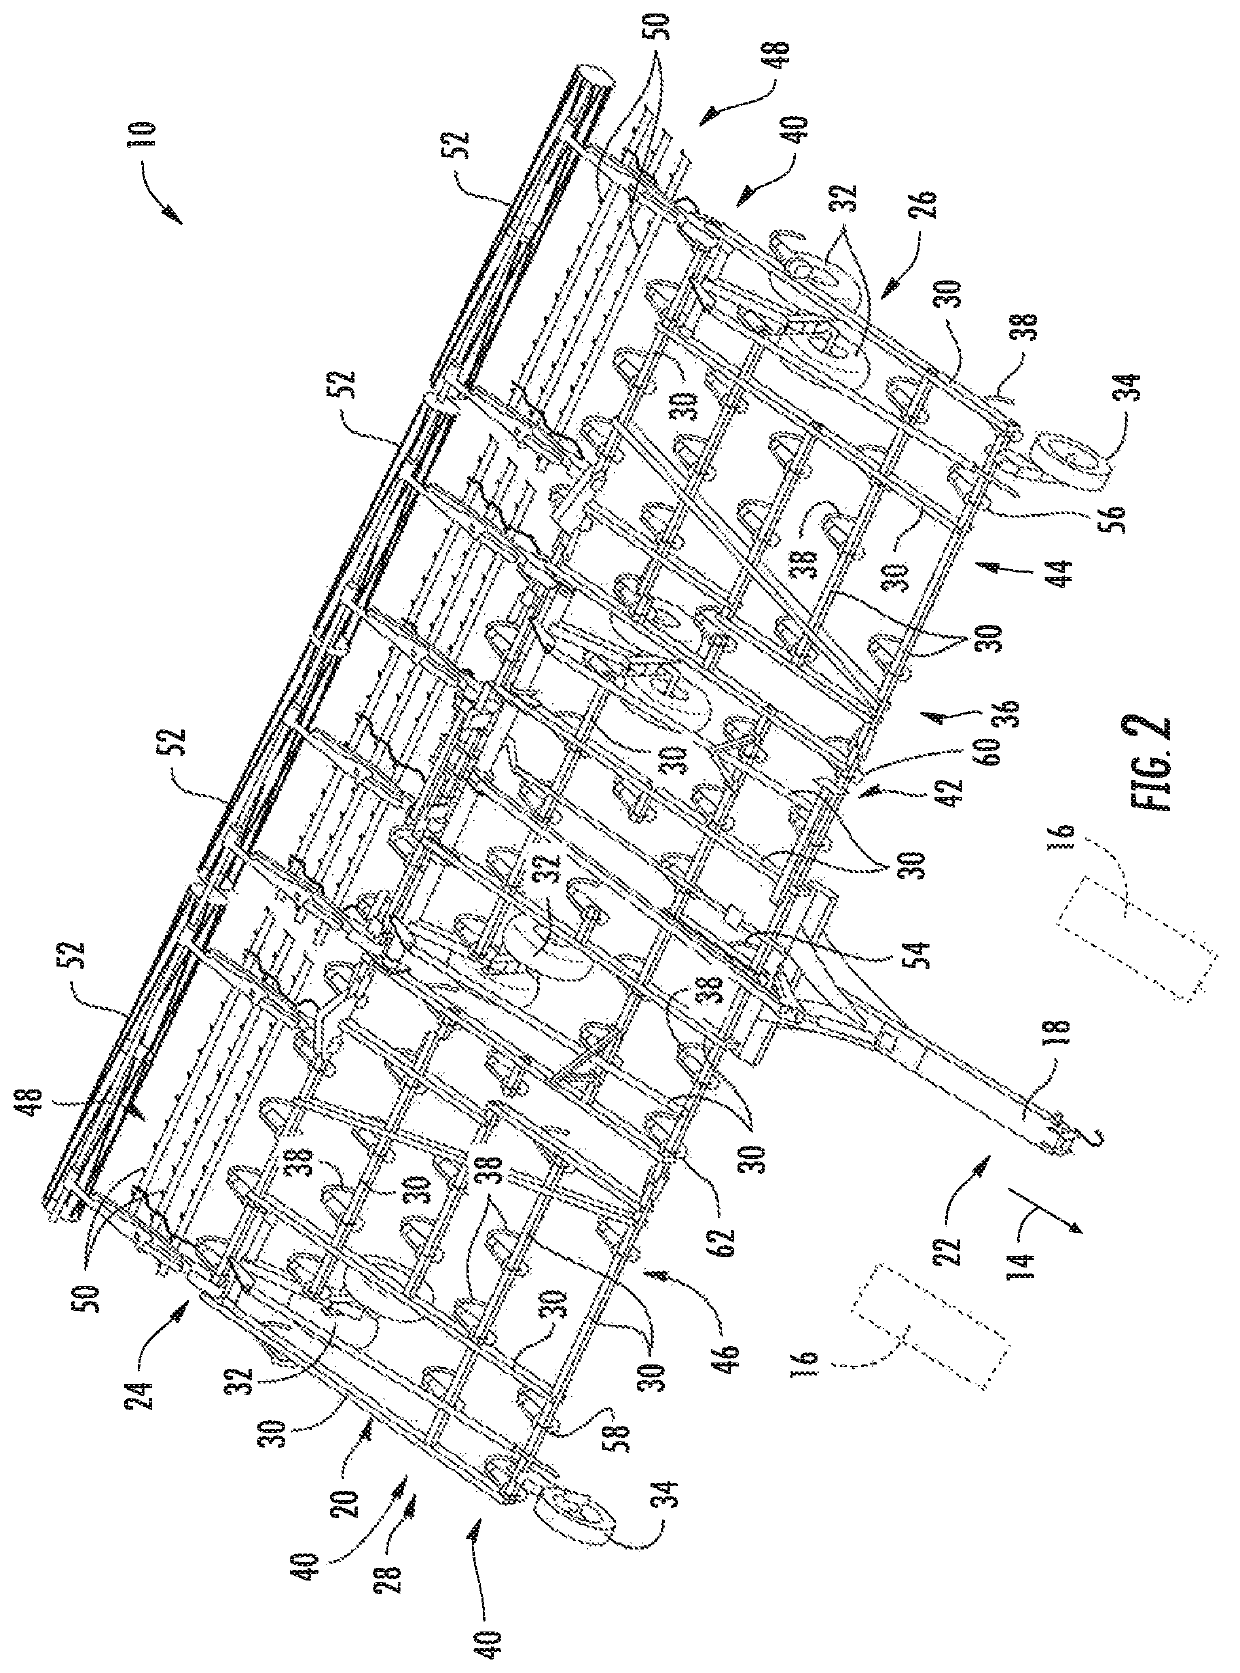 System and method for detecting ground engaging tool float for an agricultural implement